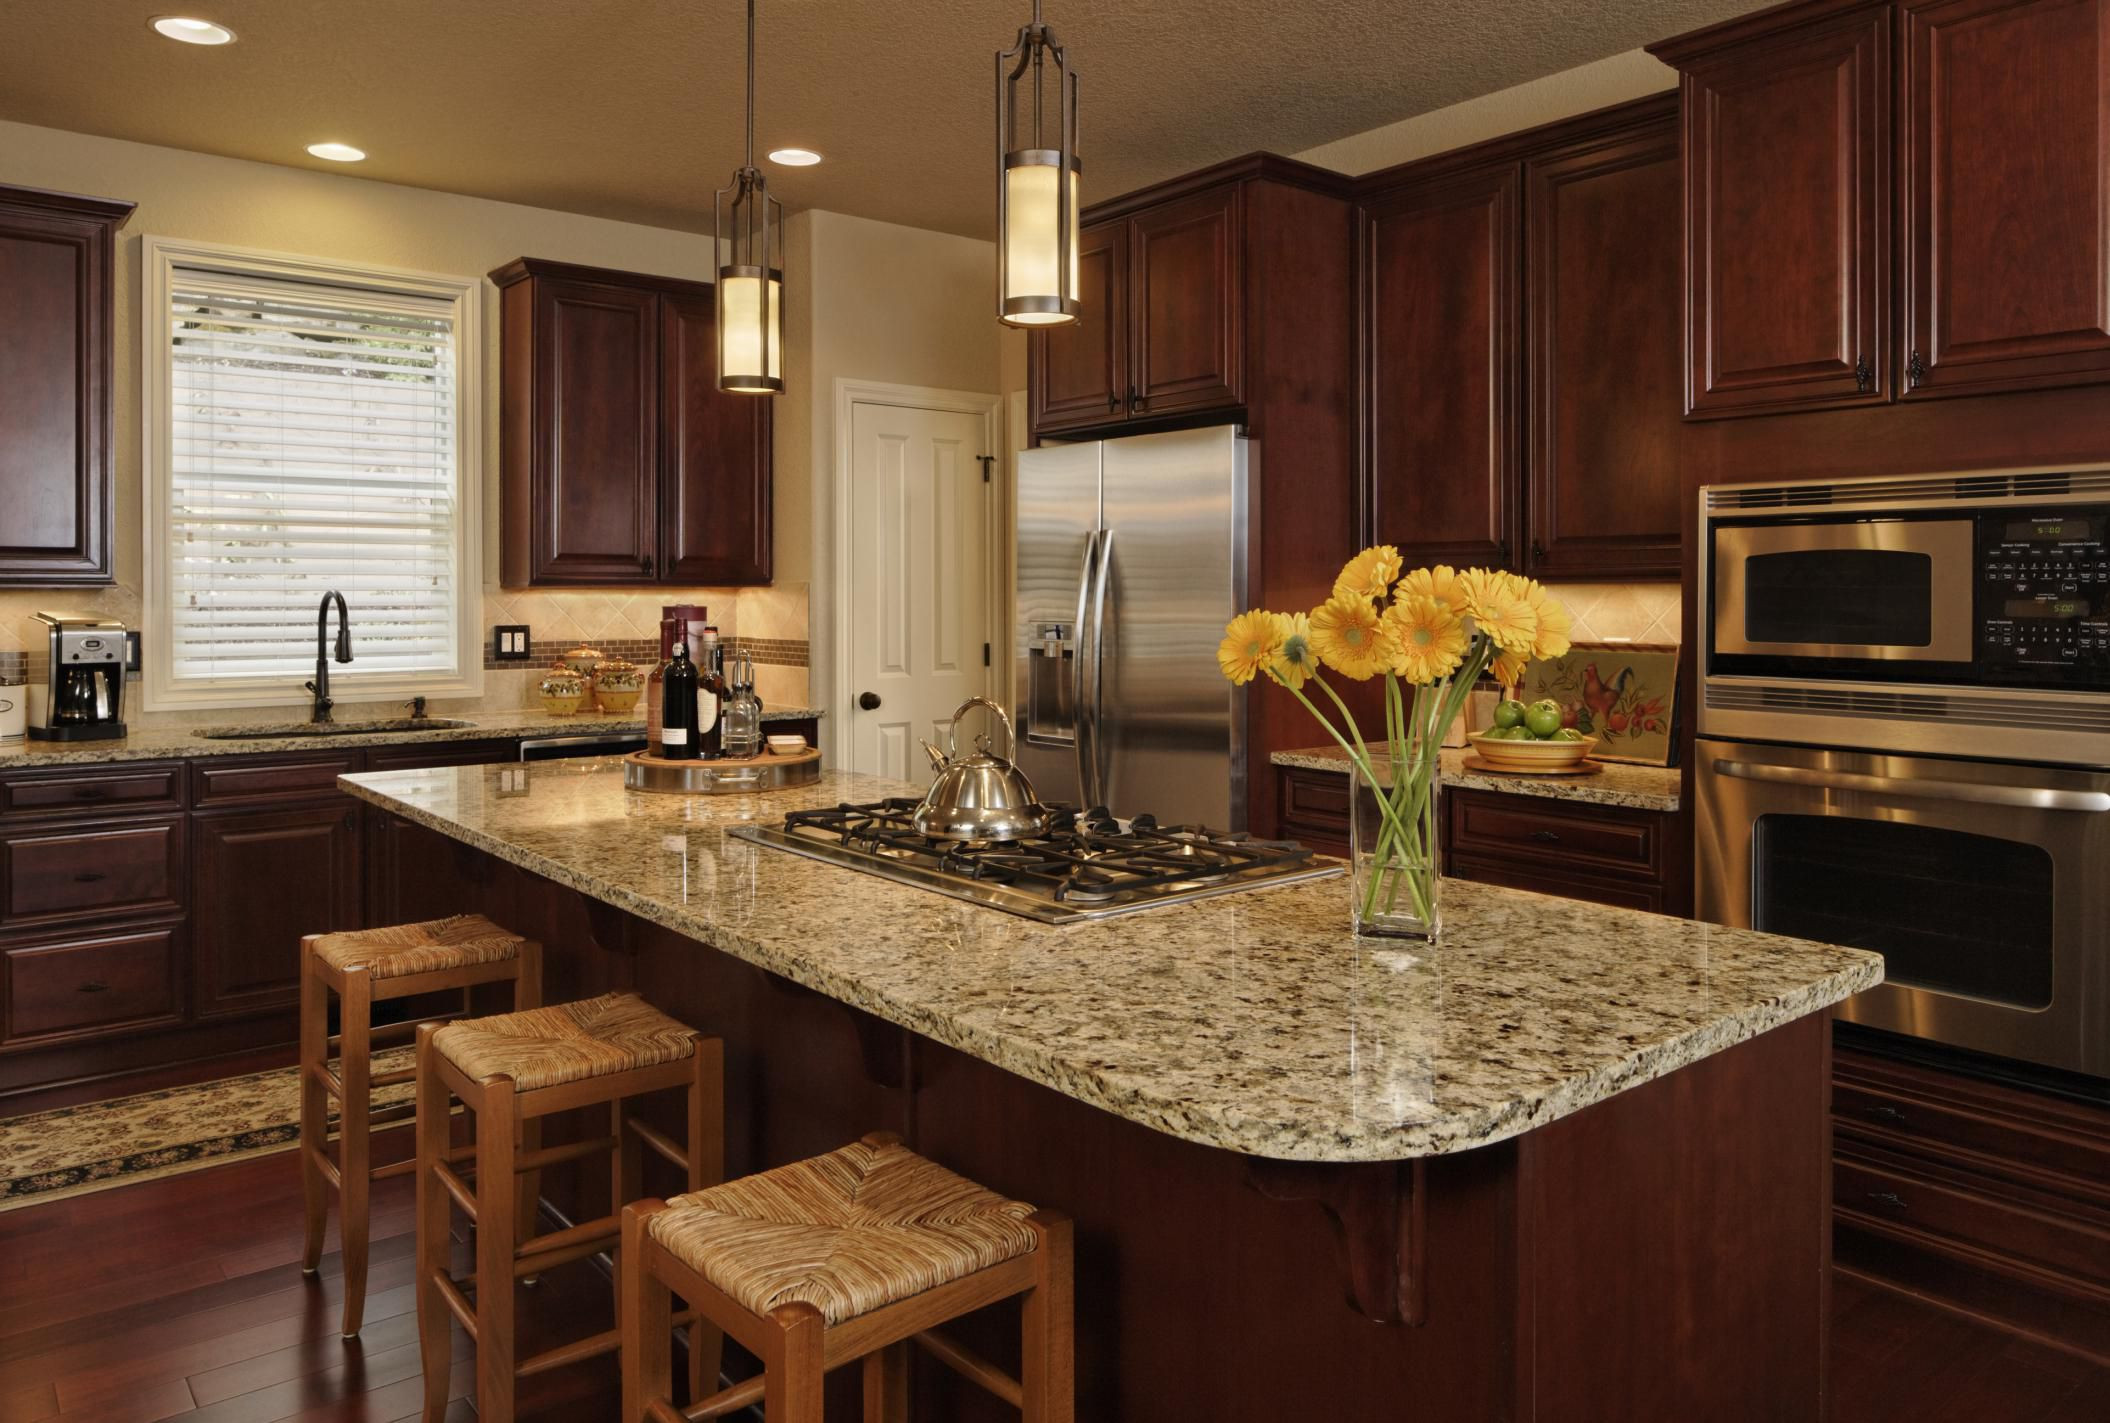 Best Kitchen Counter Material
 Top 10 Materials for Kitchen Countertops